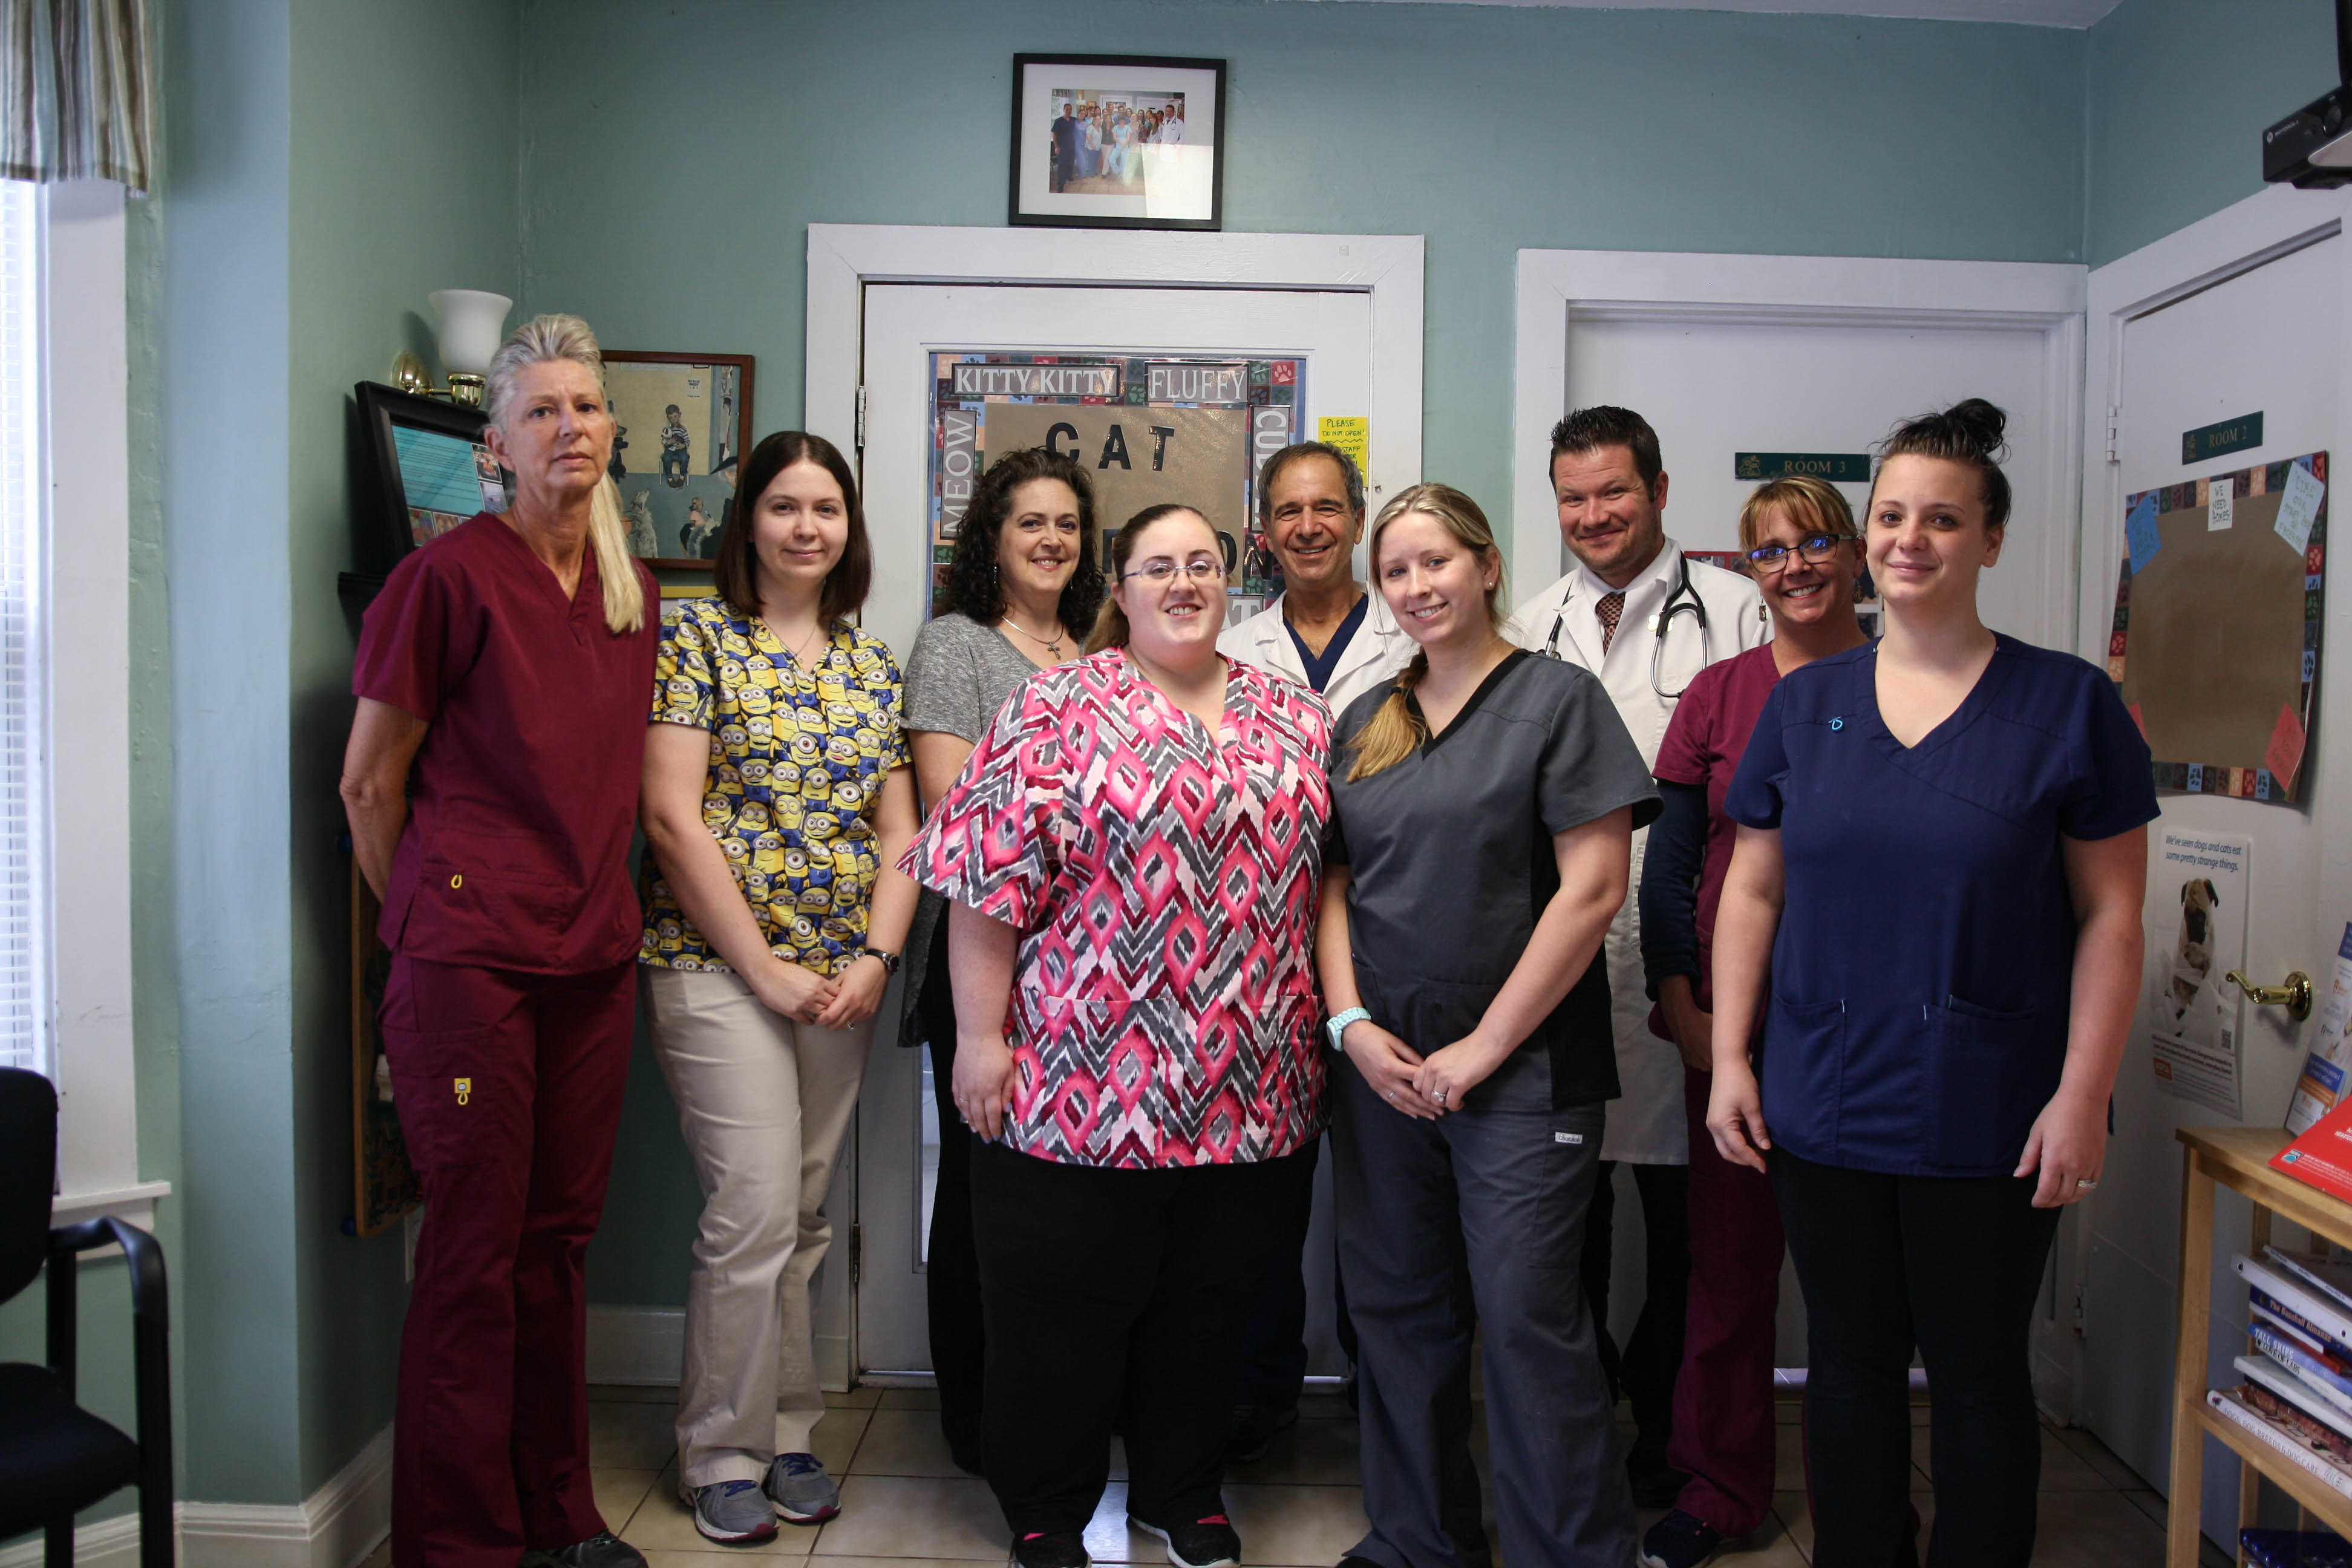 The entire staff at Borash Veterinary Clinic is dedicated to providing your pet with excellent care. We are very grateful for our incredible employees who take such pride in their work! We wouldn’t be able to ensure such high quality care without each and every one of them.